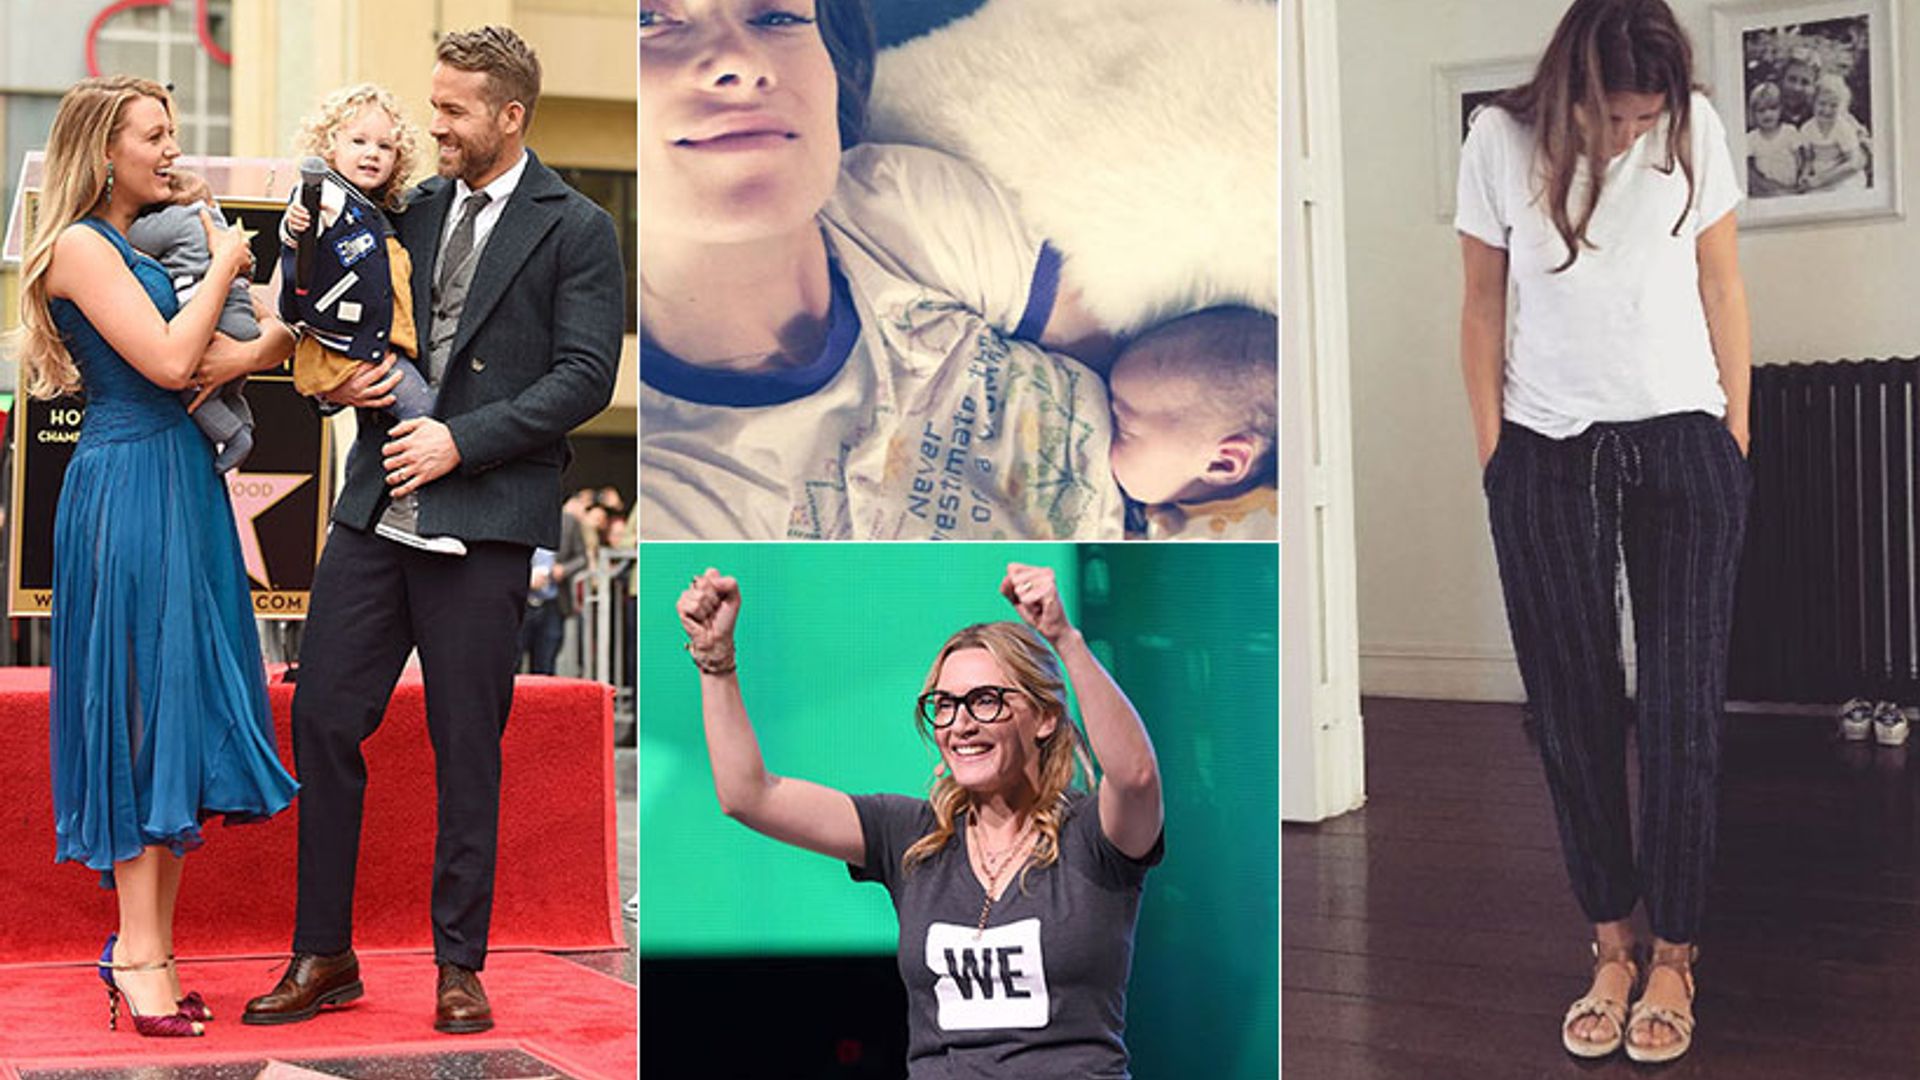 GALLERY: Celebrities who celebrate their post-baby bodies